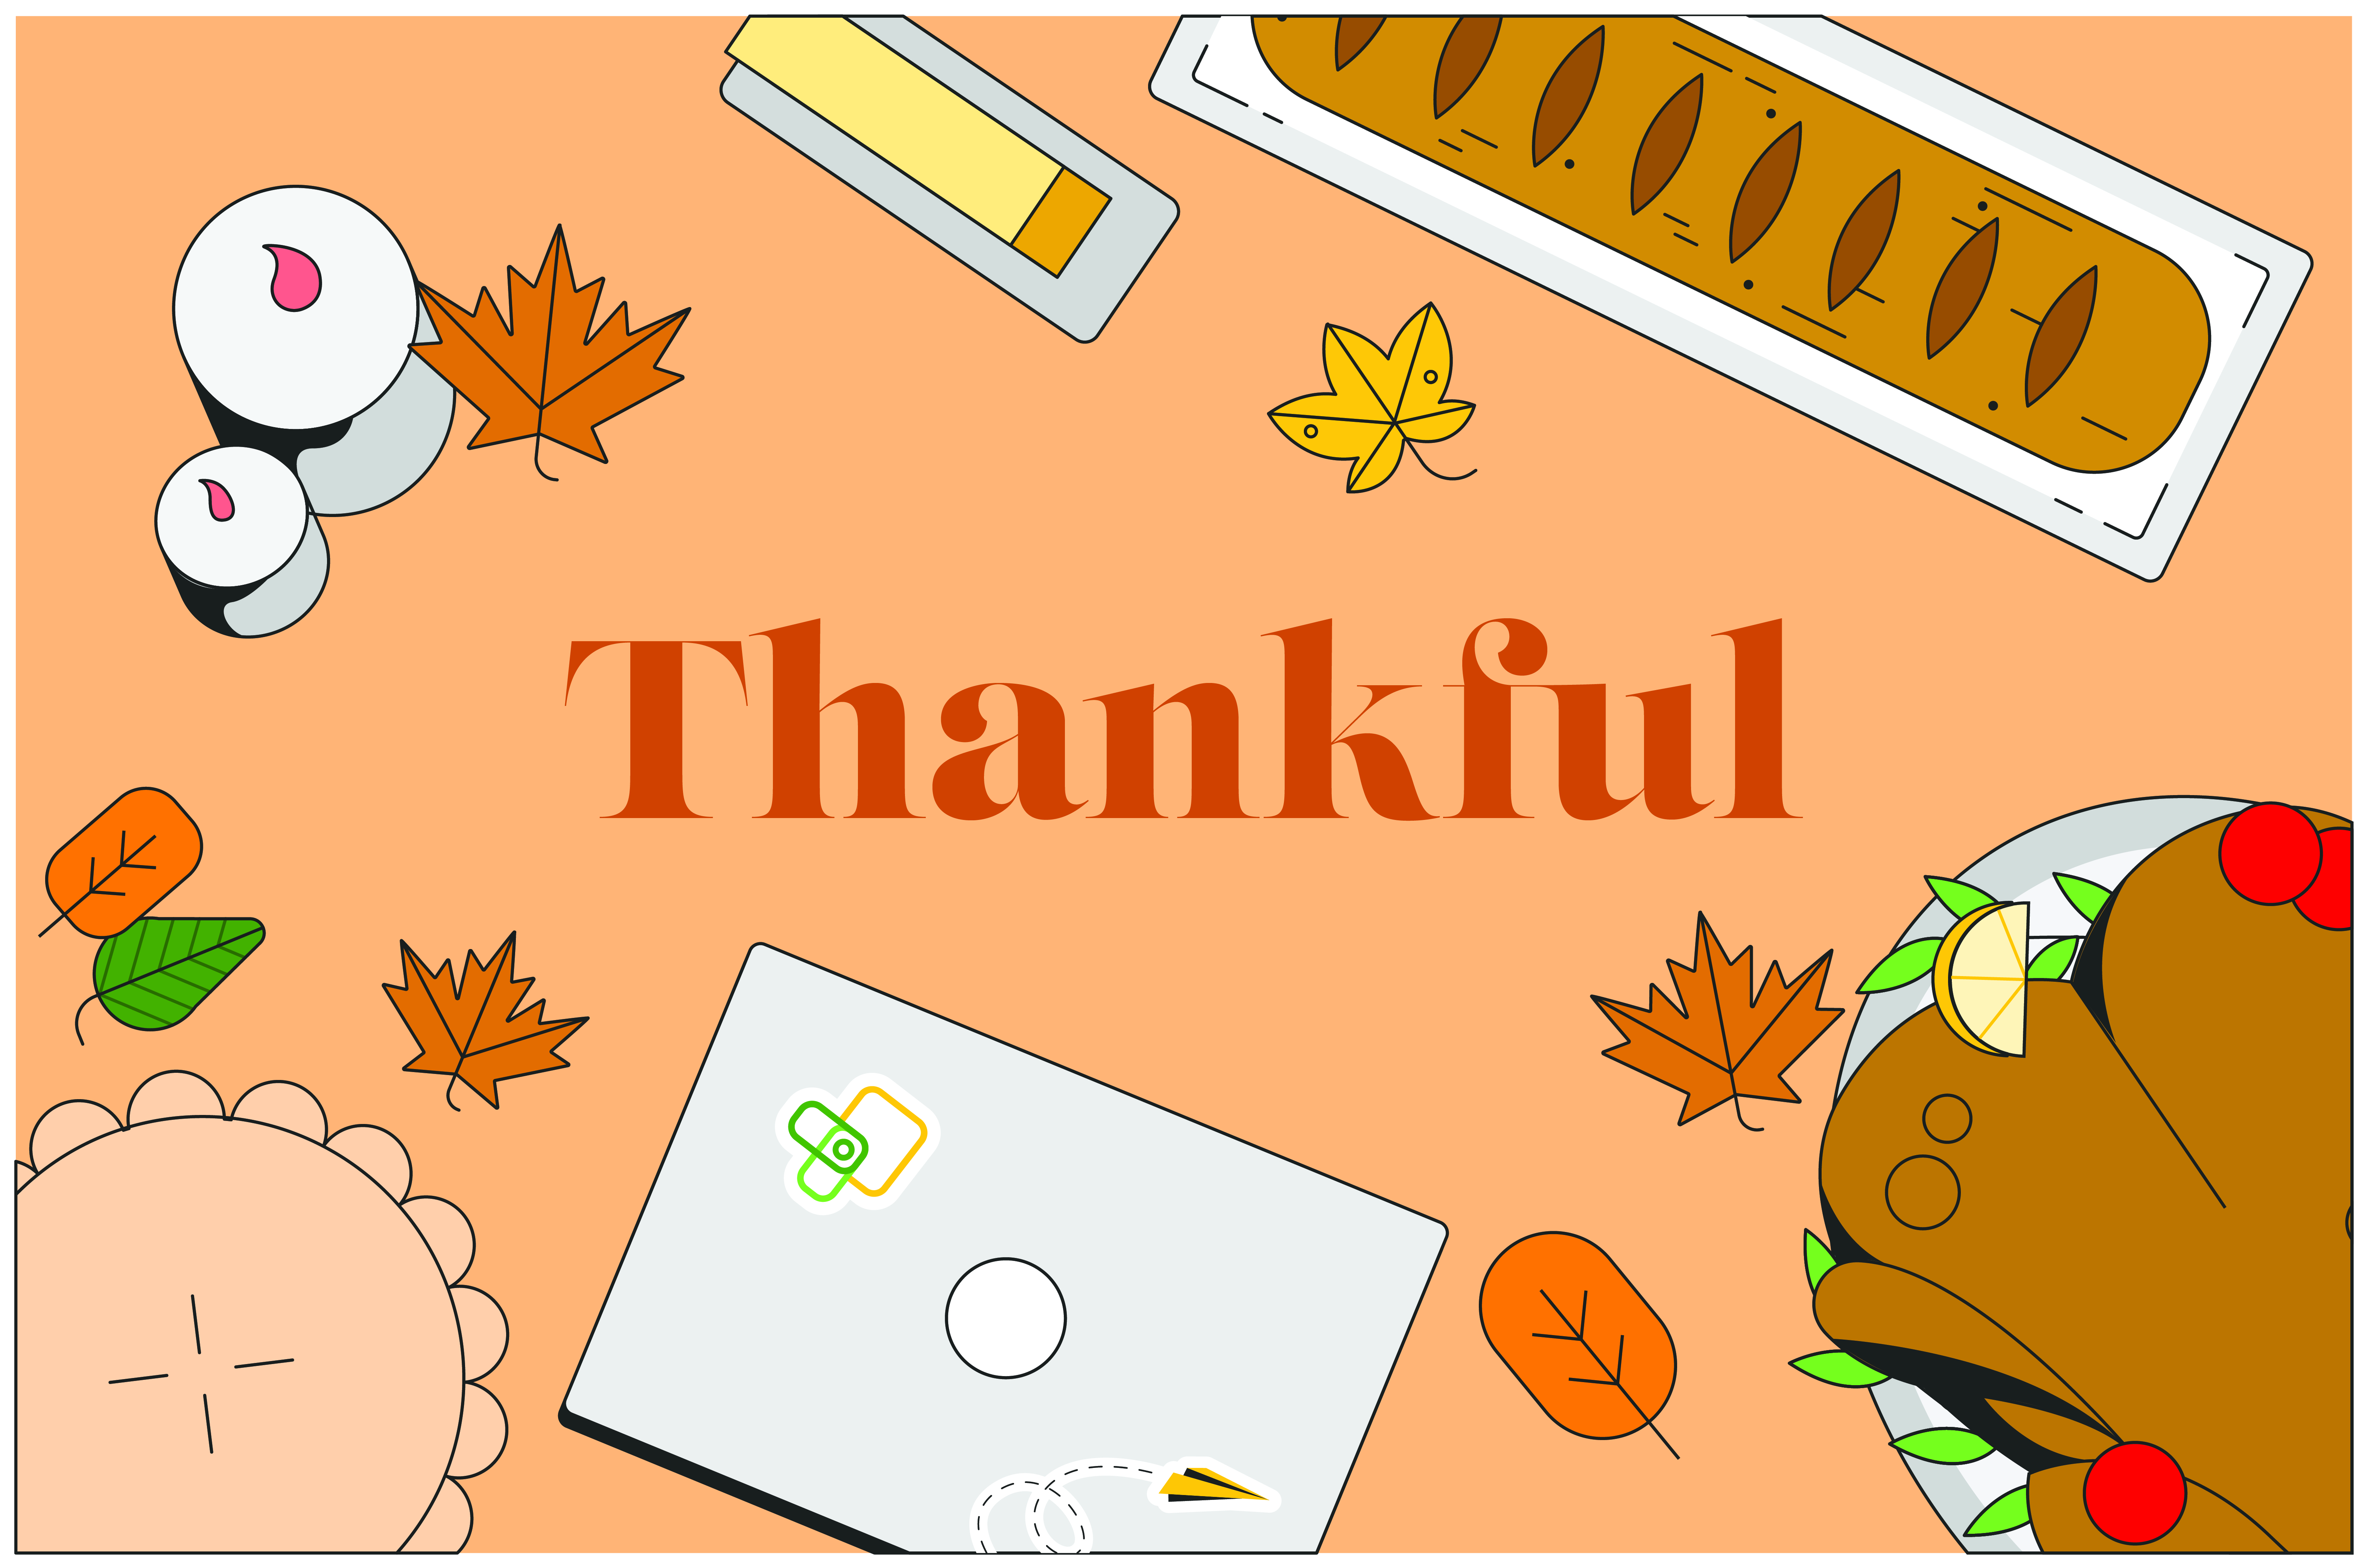 A big piece of orange text that says thankful, surrounded by various thanksgiivng items such as turkey, butter, a pie, fall colored leaves, and candles.